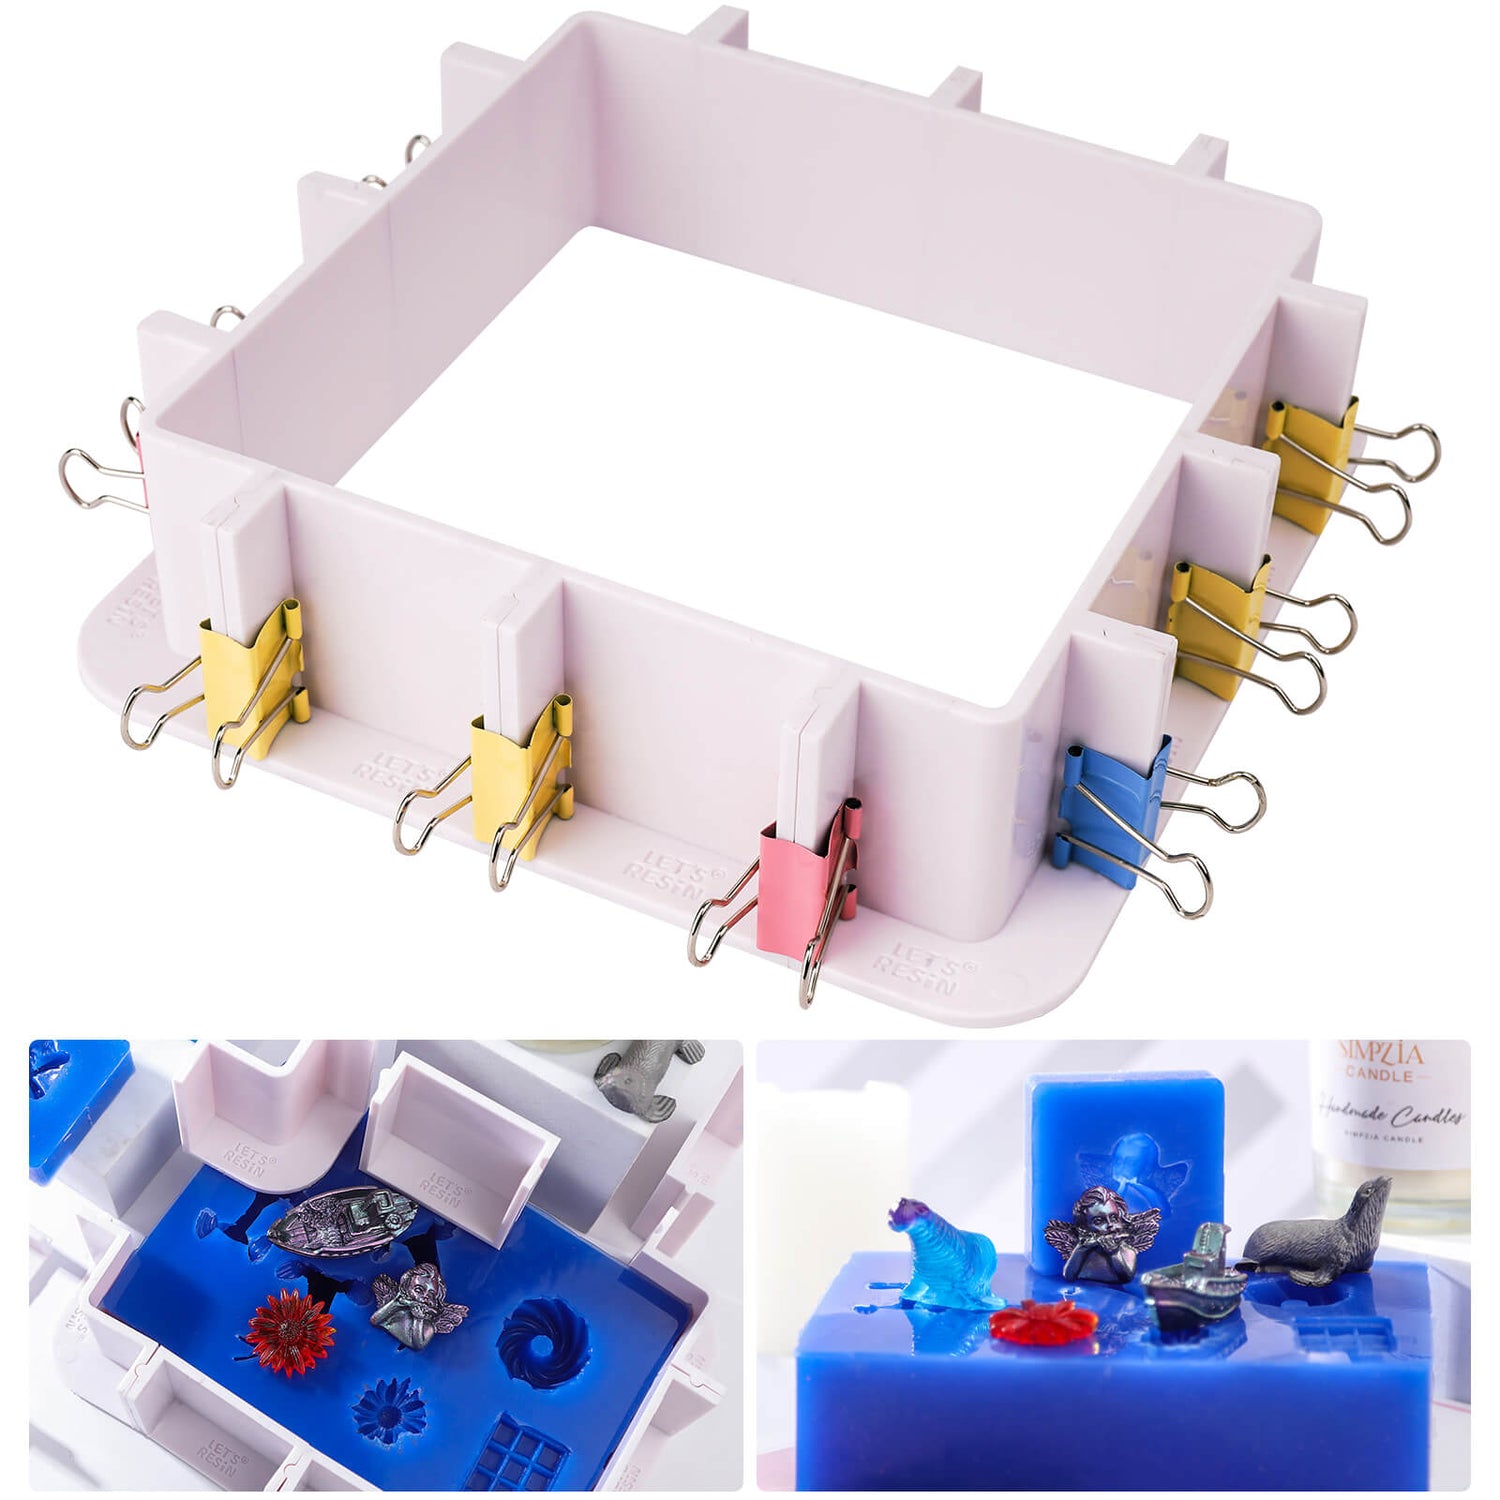 15A Silicone Mold Making Kit with Mold Housing